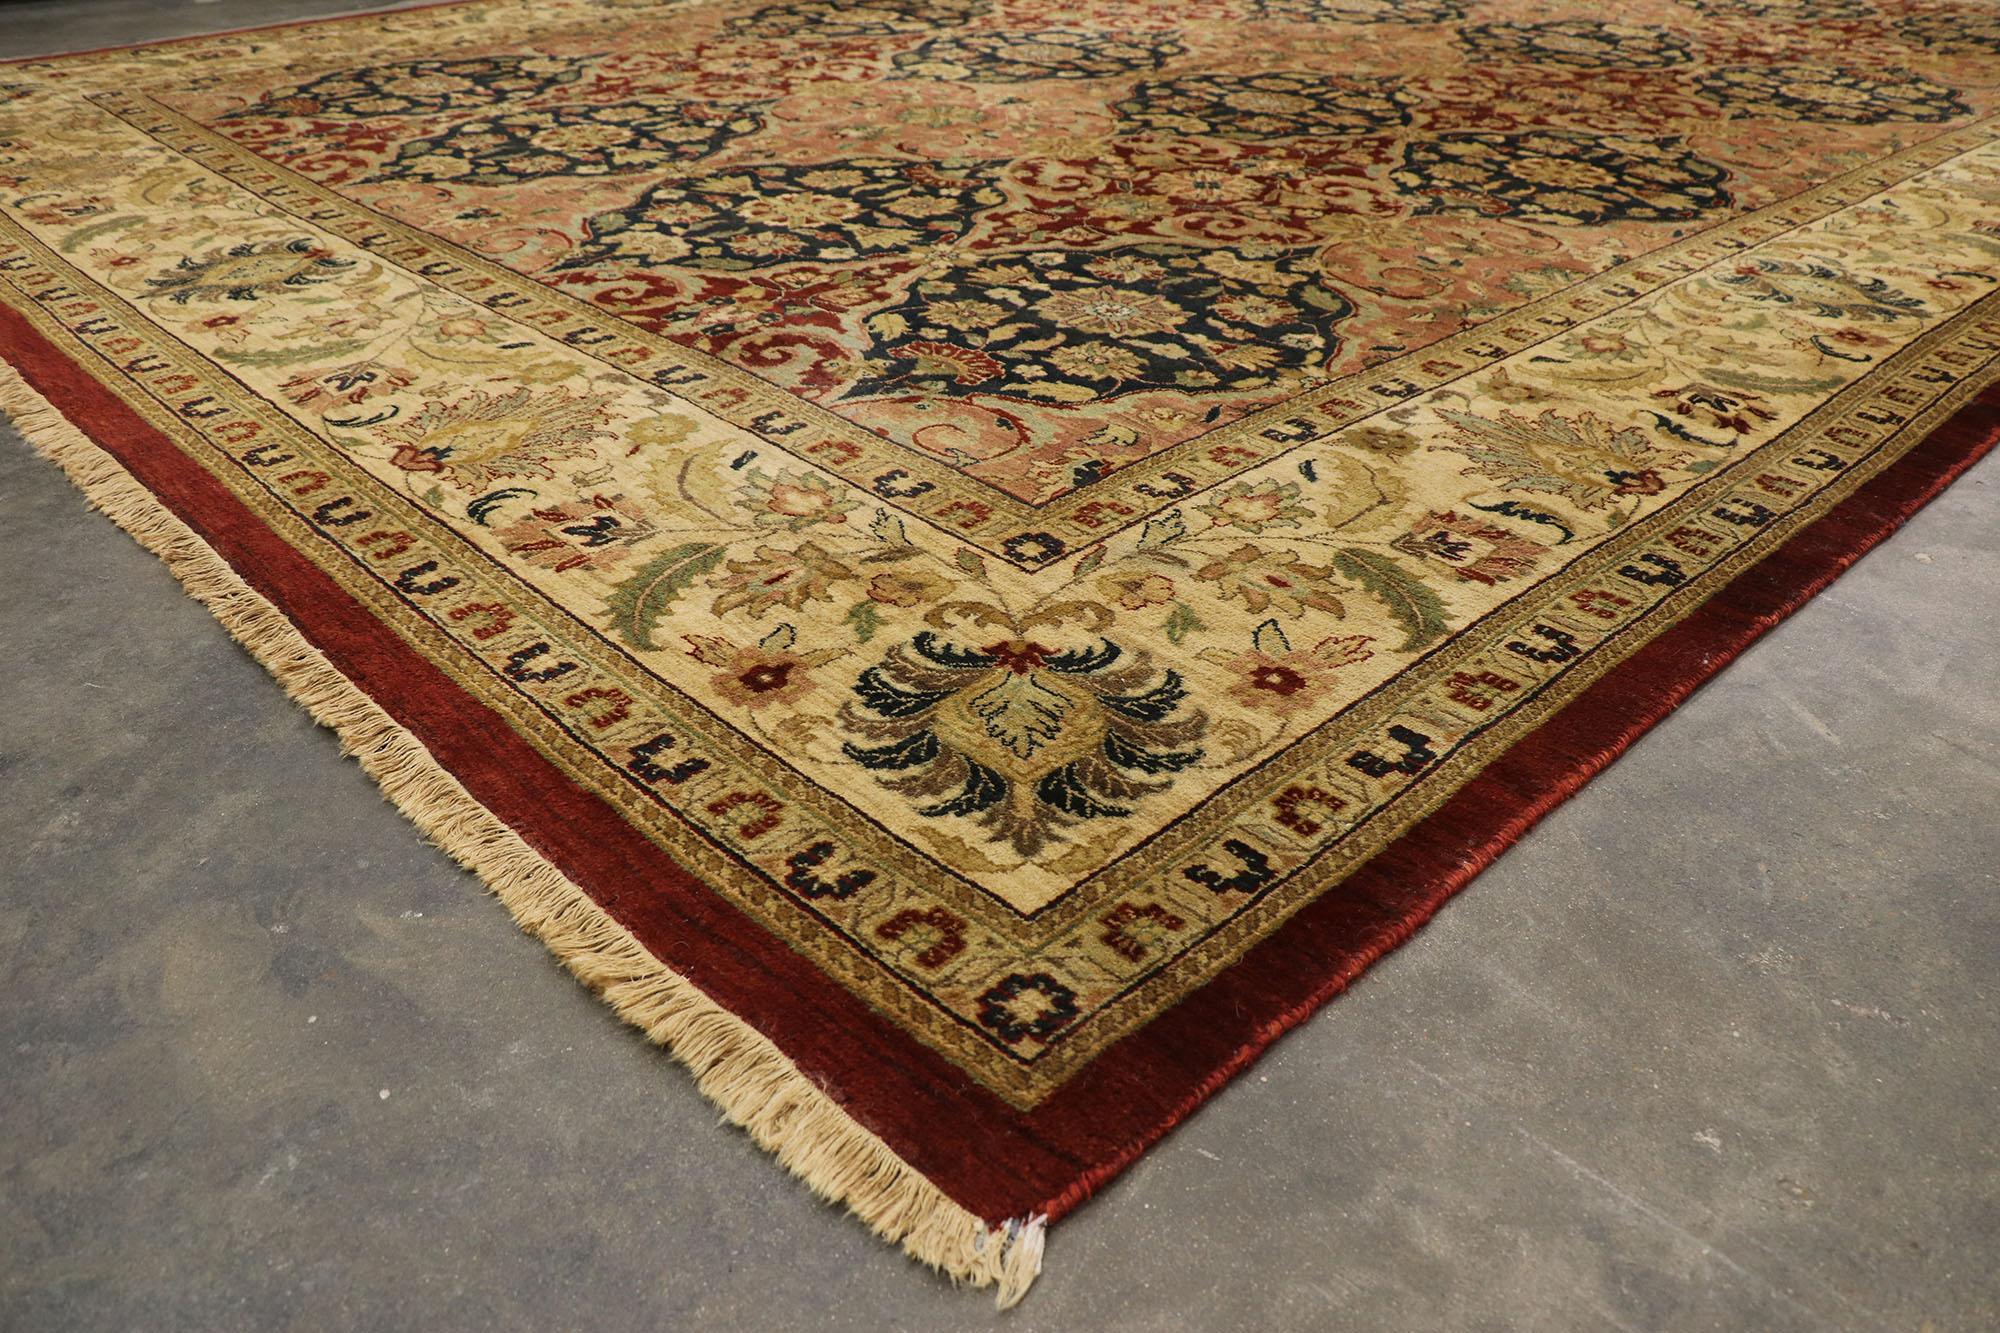 Vintage Indian Palace Rug with Old World Baroque Style In Good Condition For Sale In Dallas, TX